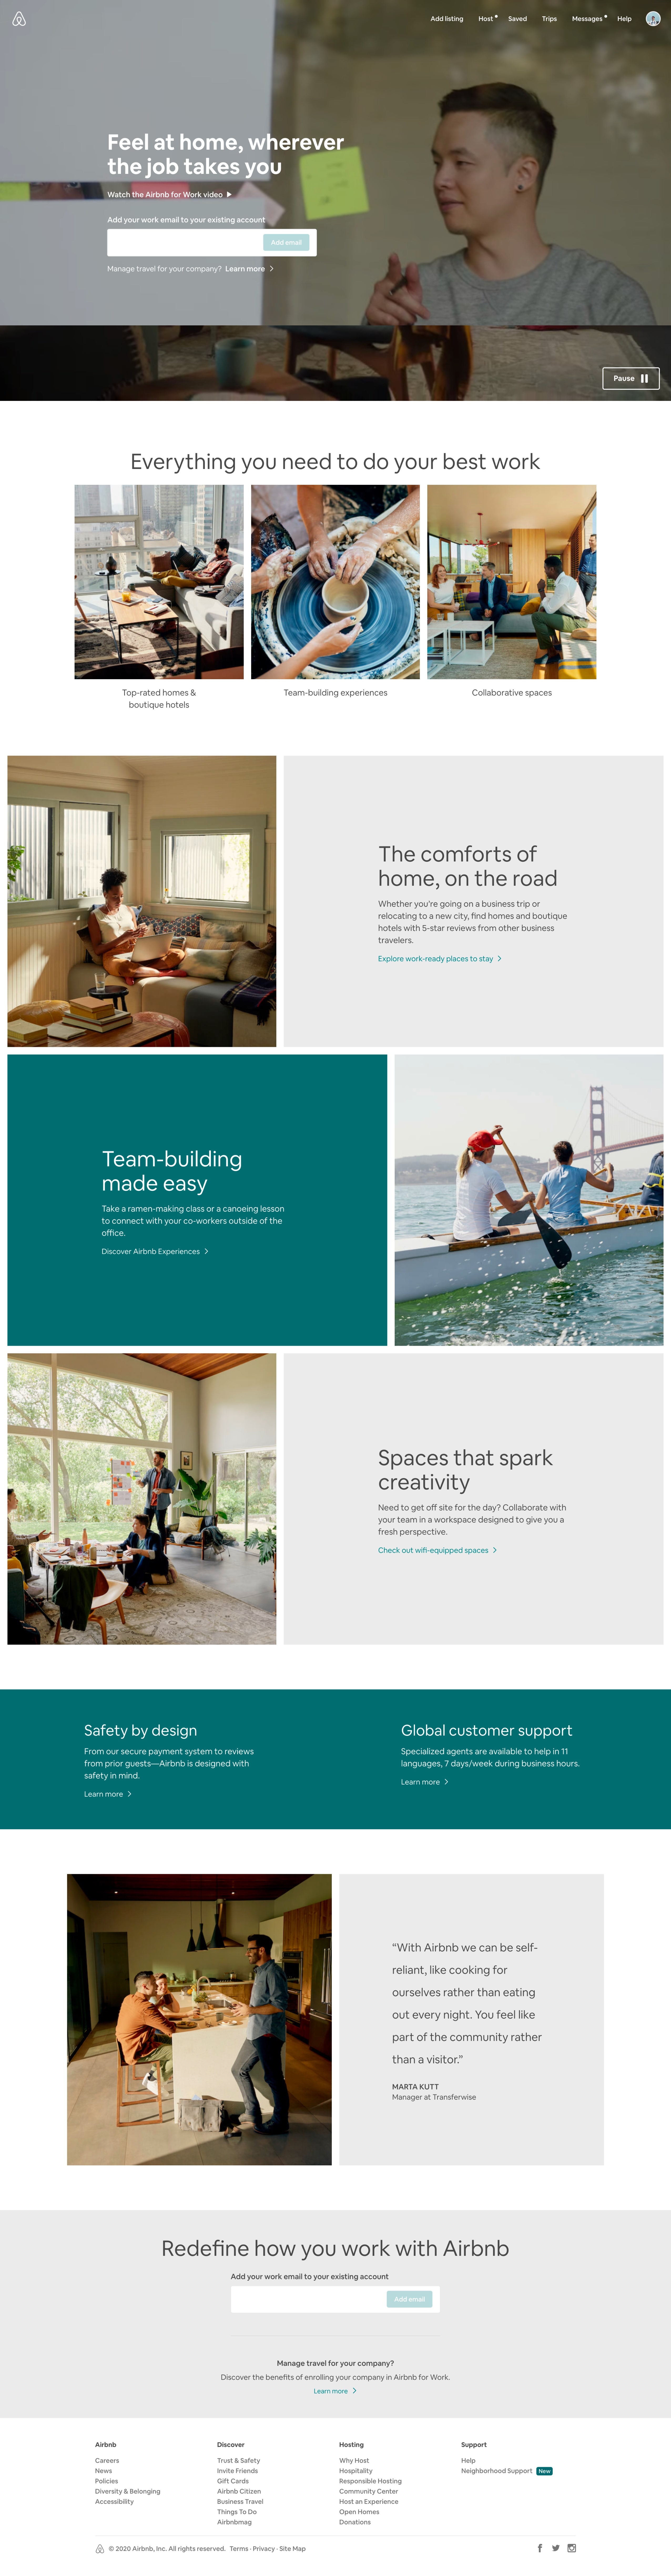 airbnb for business page design